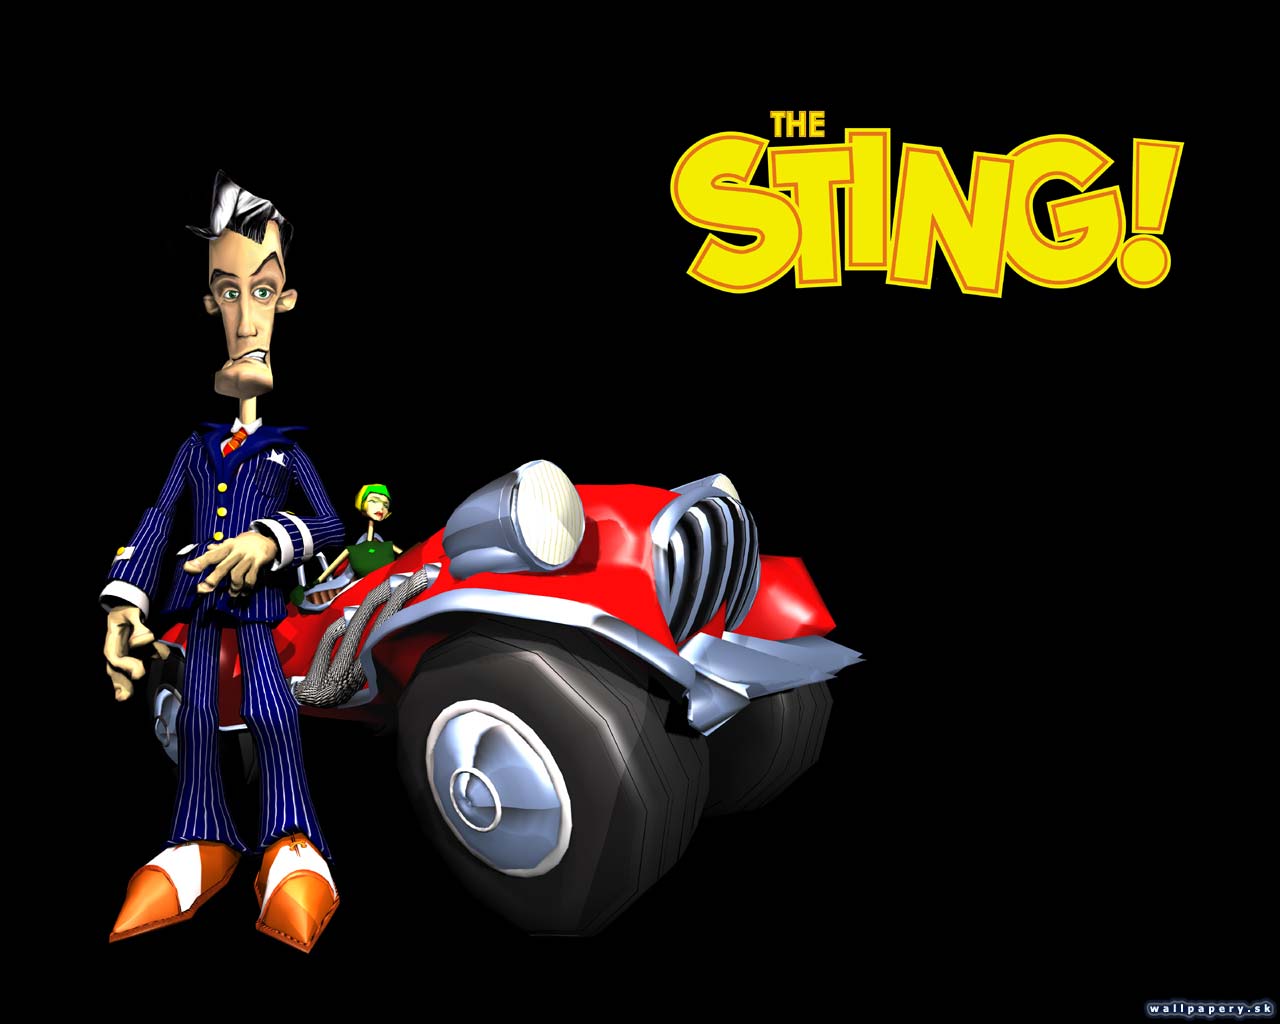 The Sting! - wallpaper 1